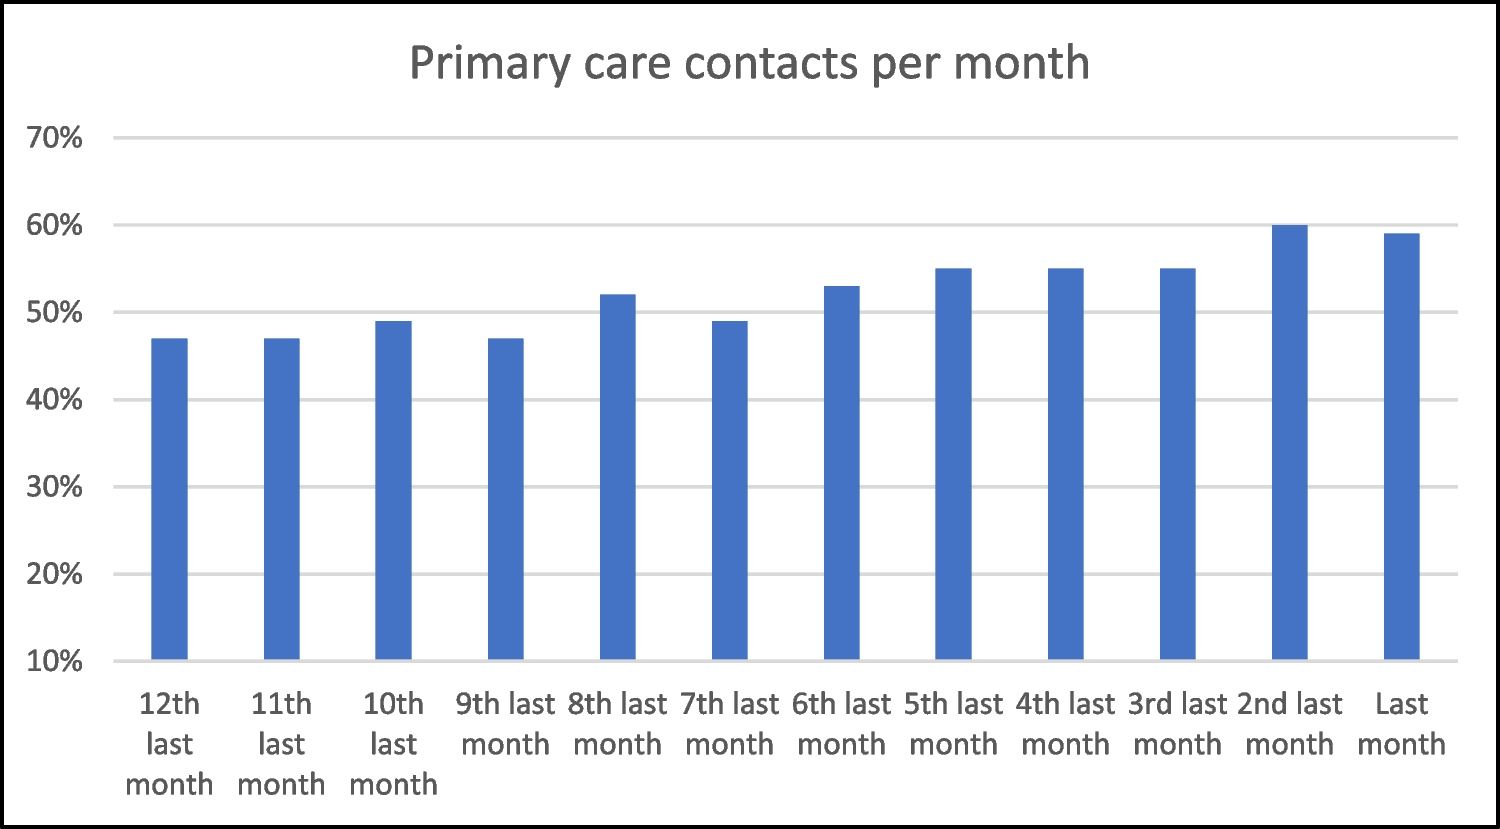 Primary care usage at the end of life: a retrospective cohort study of cancer patients using linked primary and hospital care data